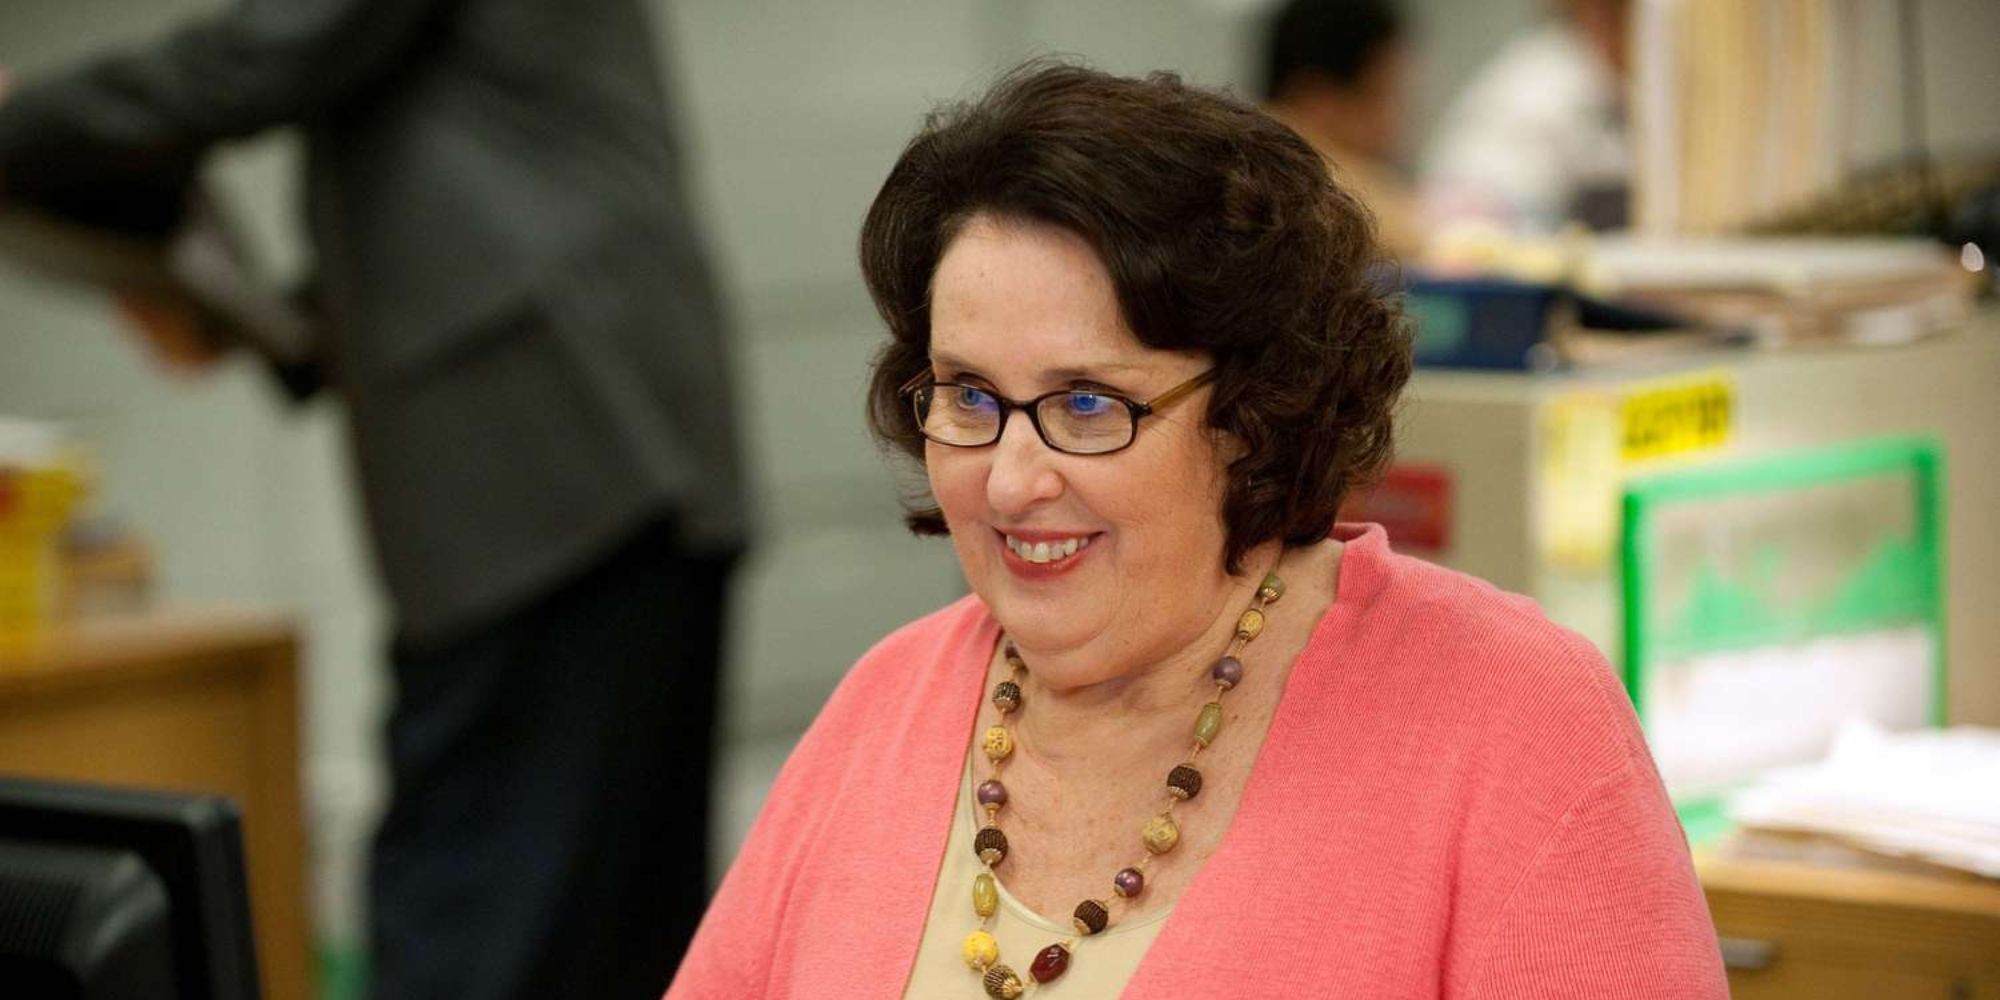 Phyllis Smith as Phyllis Vance in The Office